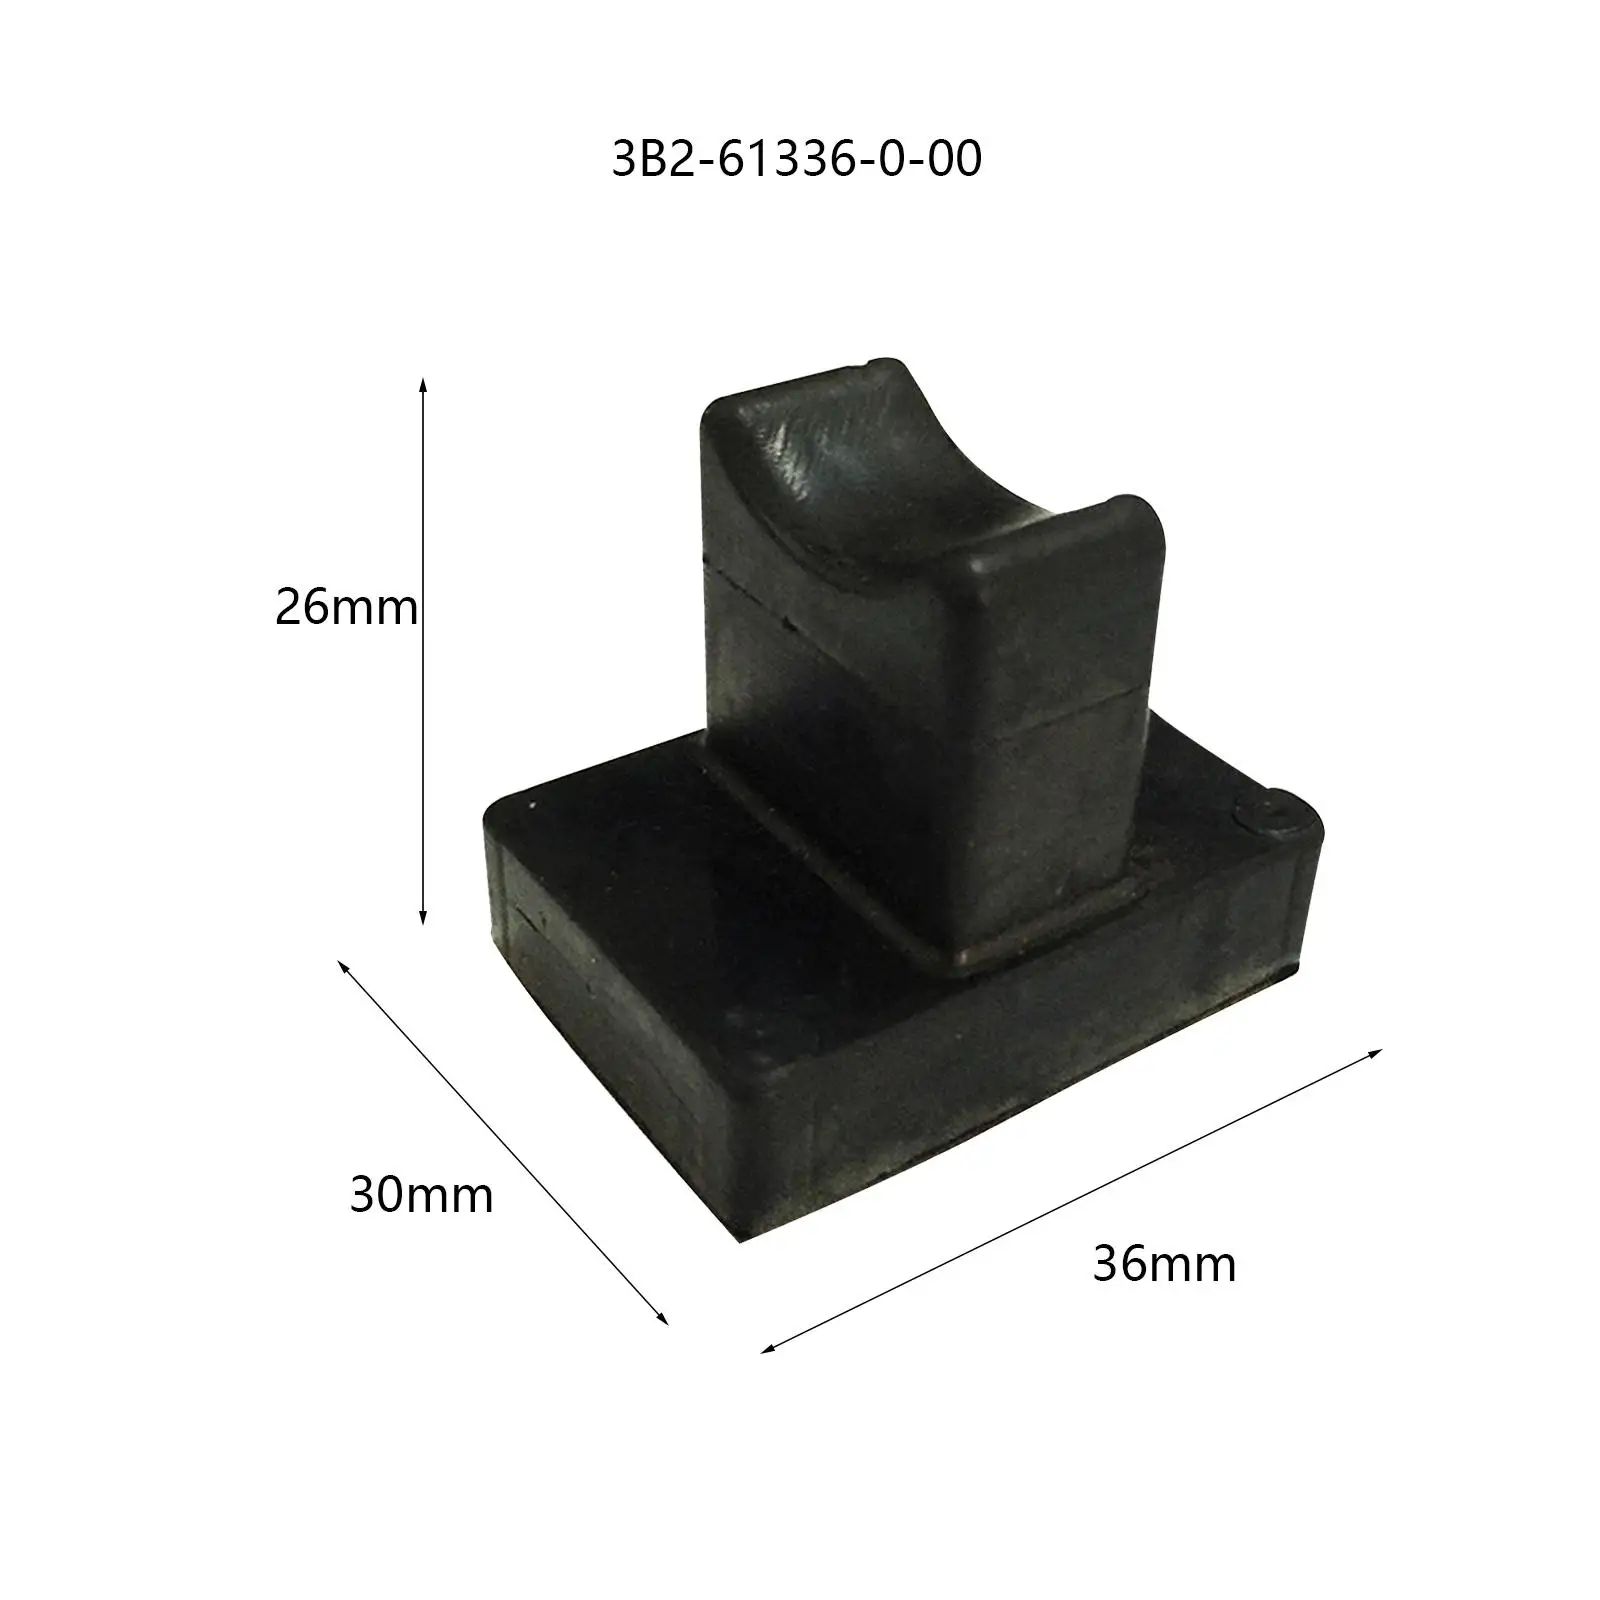 Outboard Motor Rubber Pad Replacement Accessory Durable Spare Parts Rubber Mat 3B2-61336-0-00 for Nissan Outboard Engine